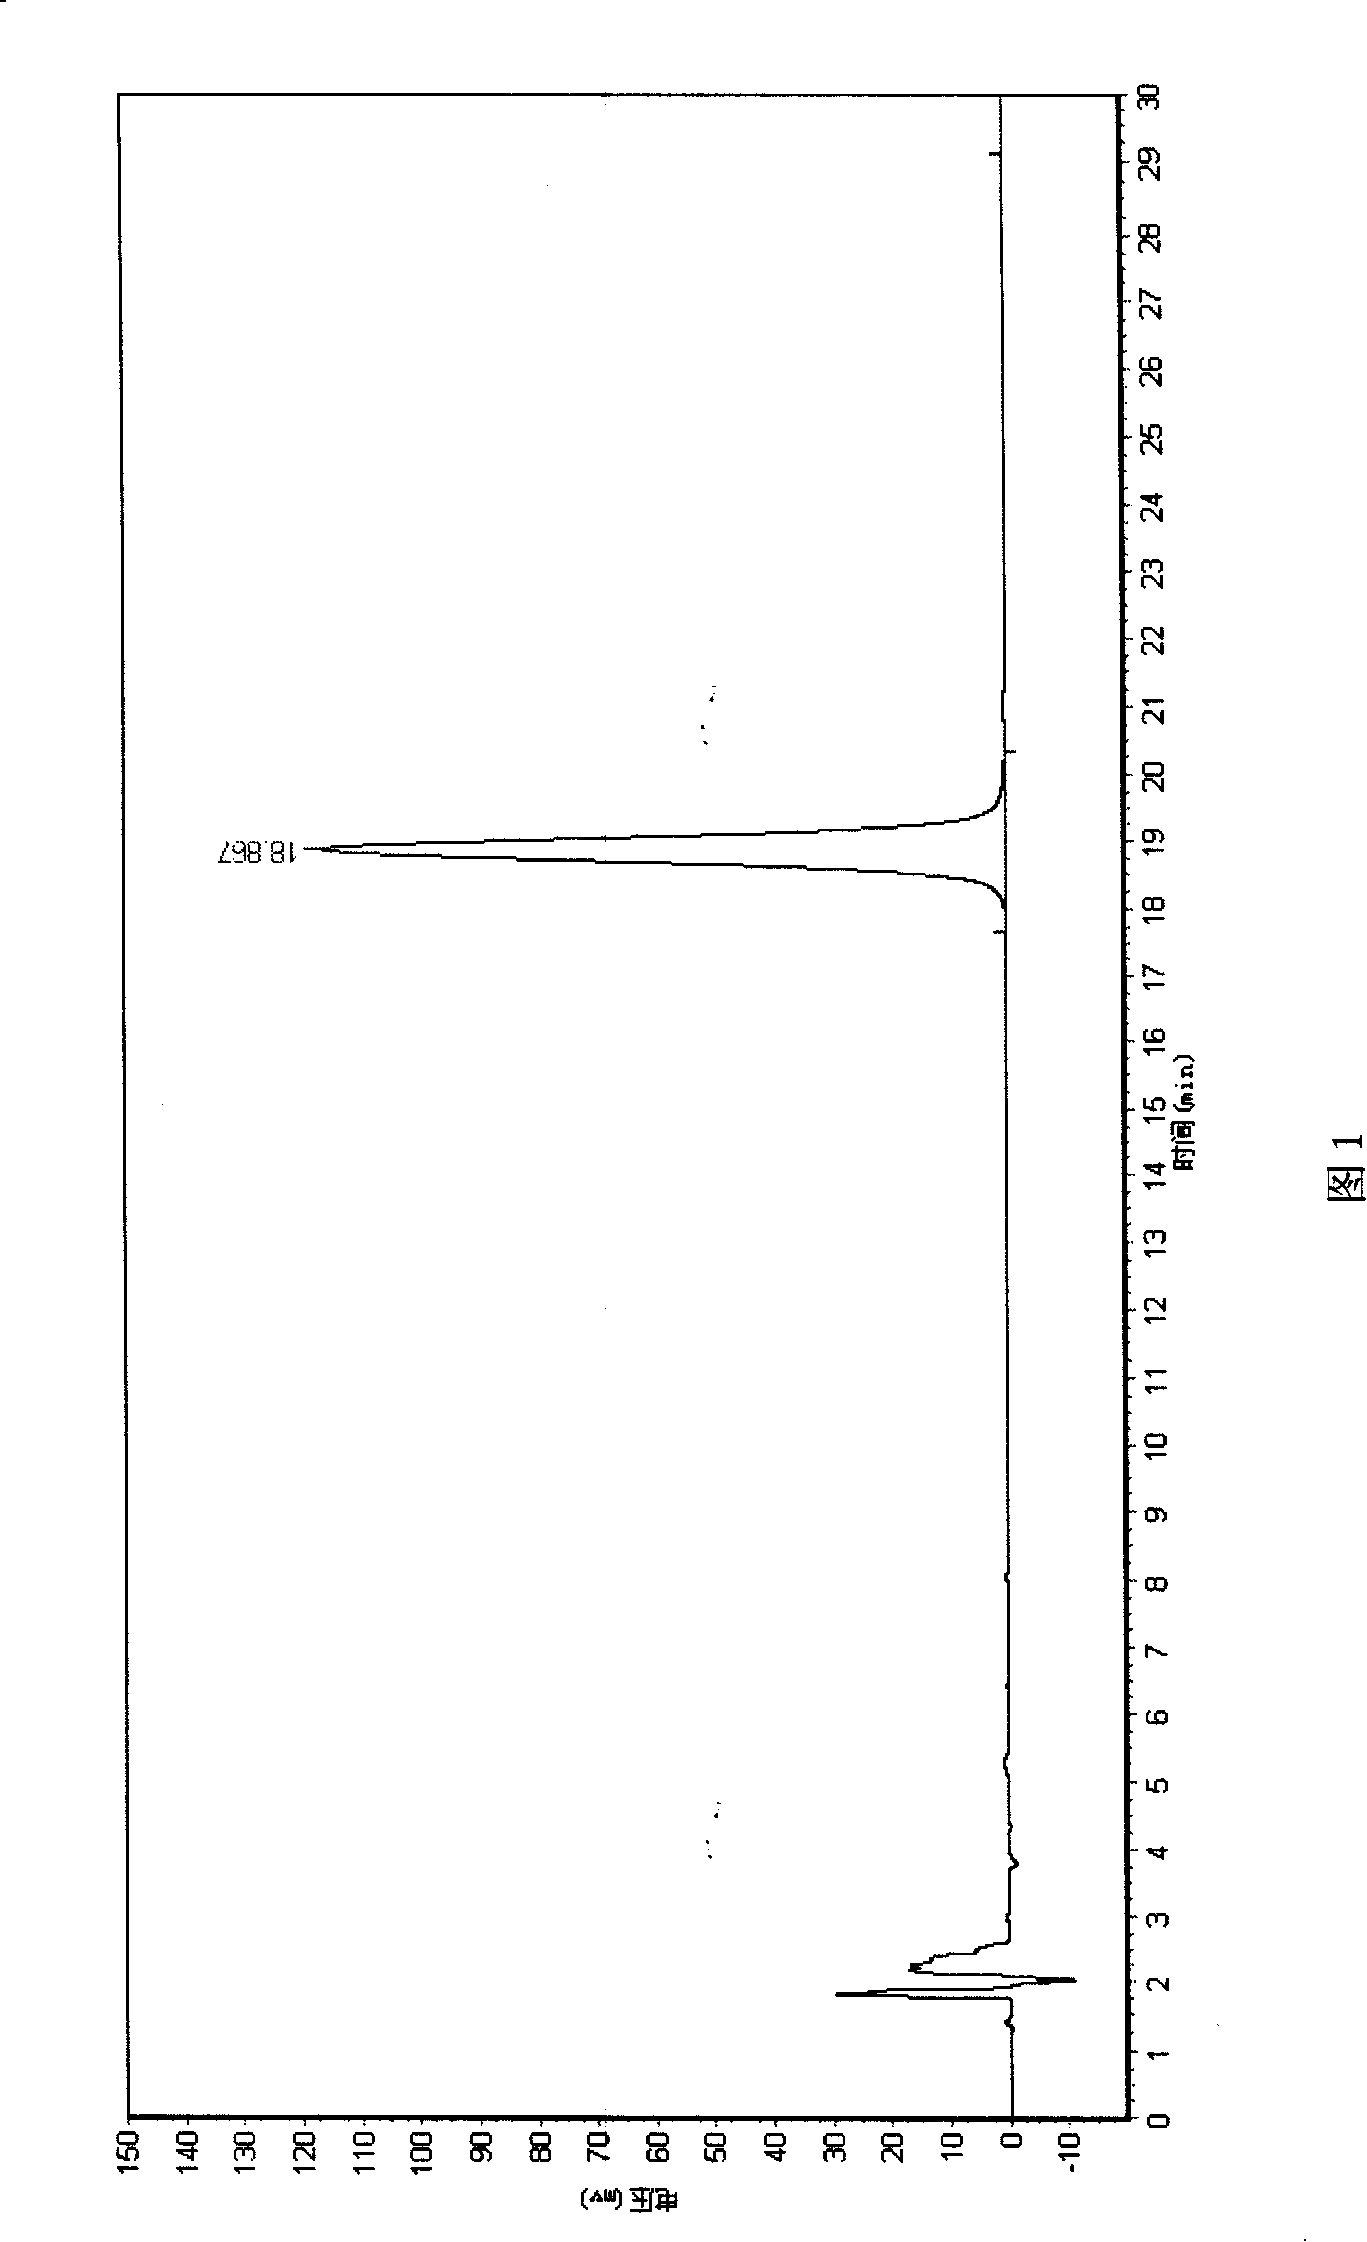 Method for preparing high-purity beta-elemene by citronella oil byproduct